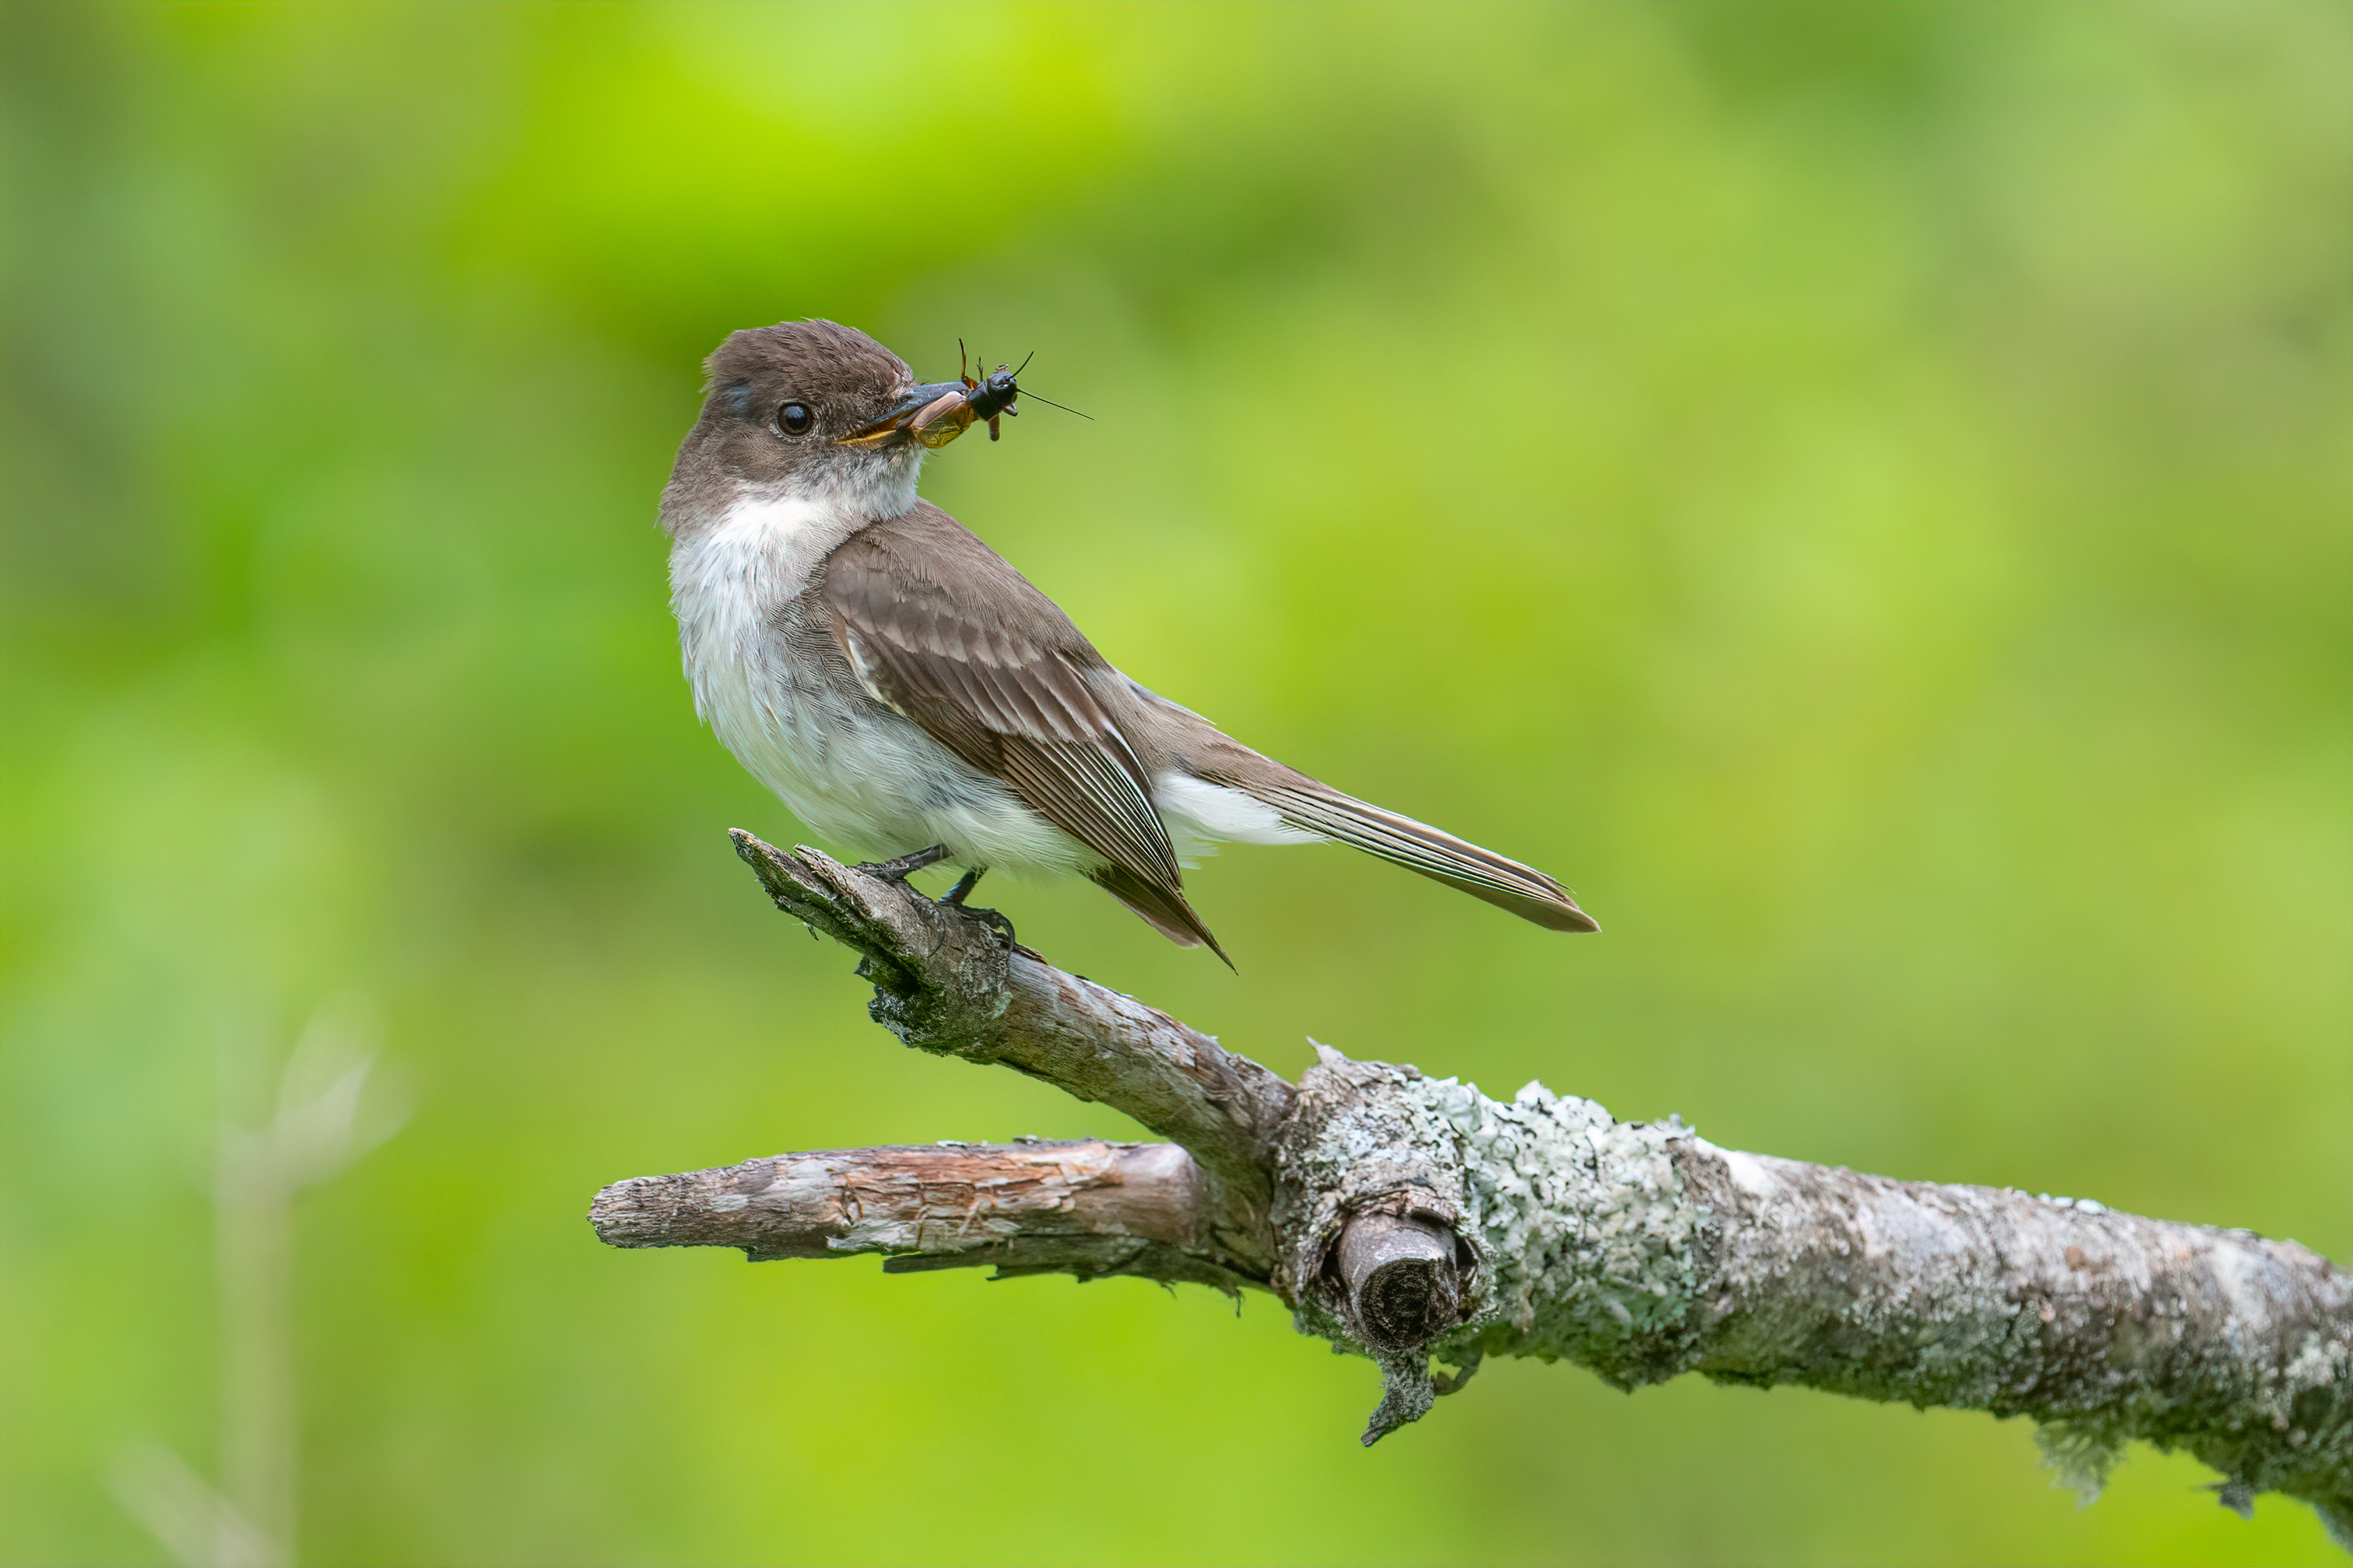 Eastern Phoebe perched on a branch, with an insect in its beak. Photo: Sheen Watkins/Audubon Photography Awards.